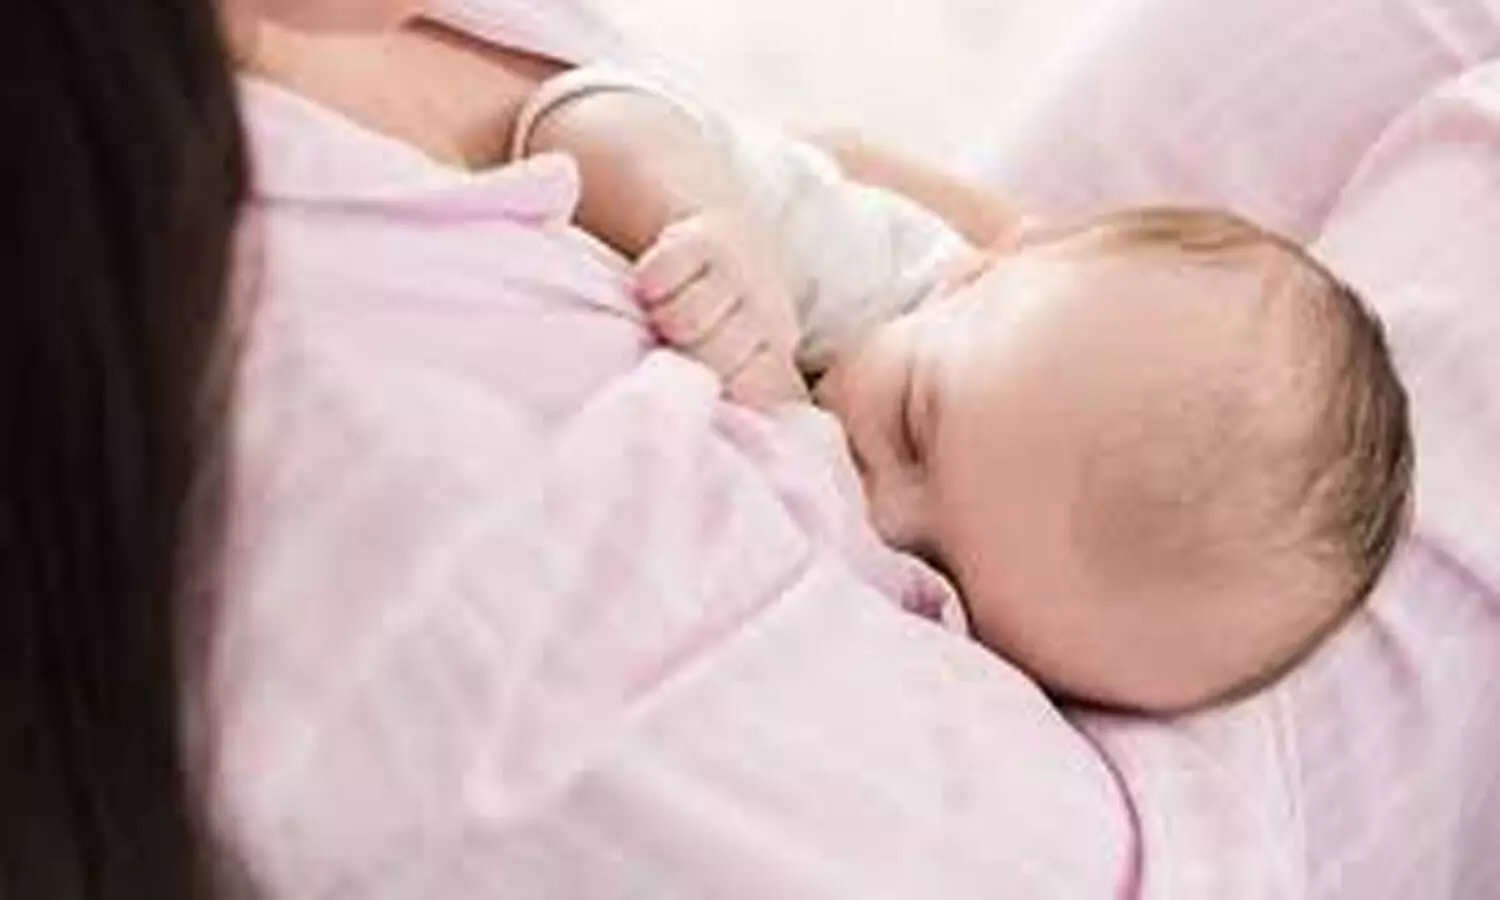 COVID-19 vaccination of breast feeding mothers may also protect babies